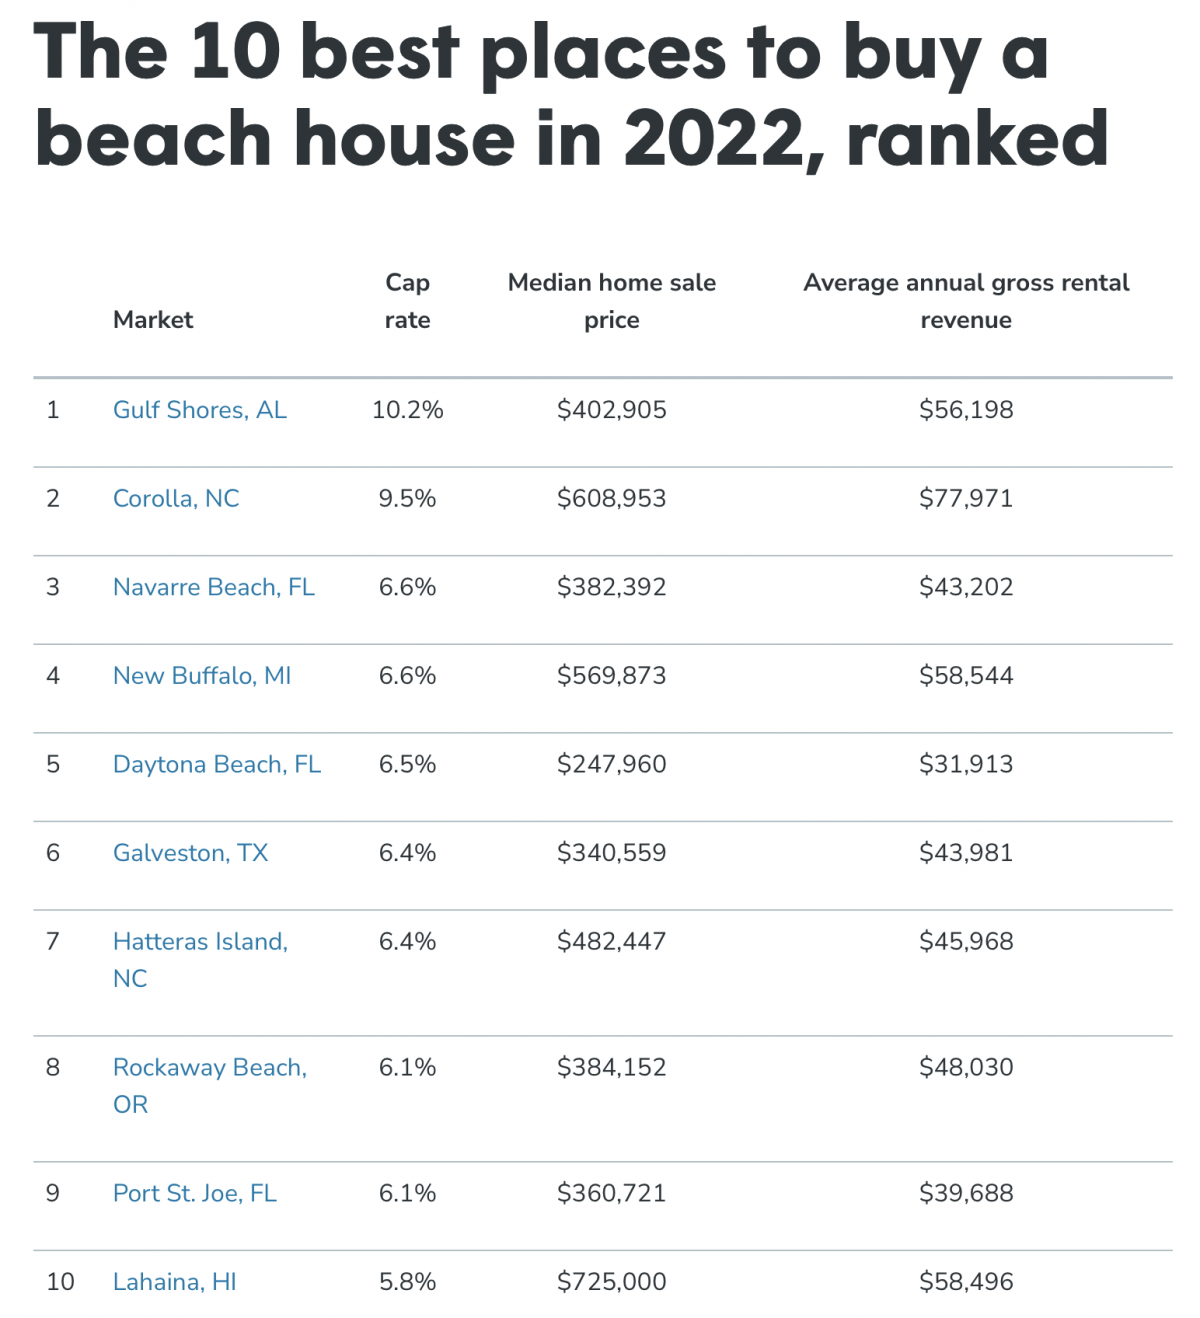 A top 10 list of the best places to buy a beach house in 2022